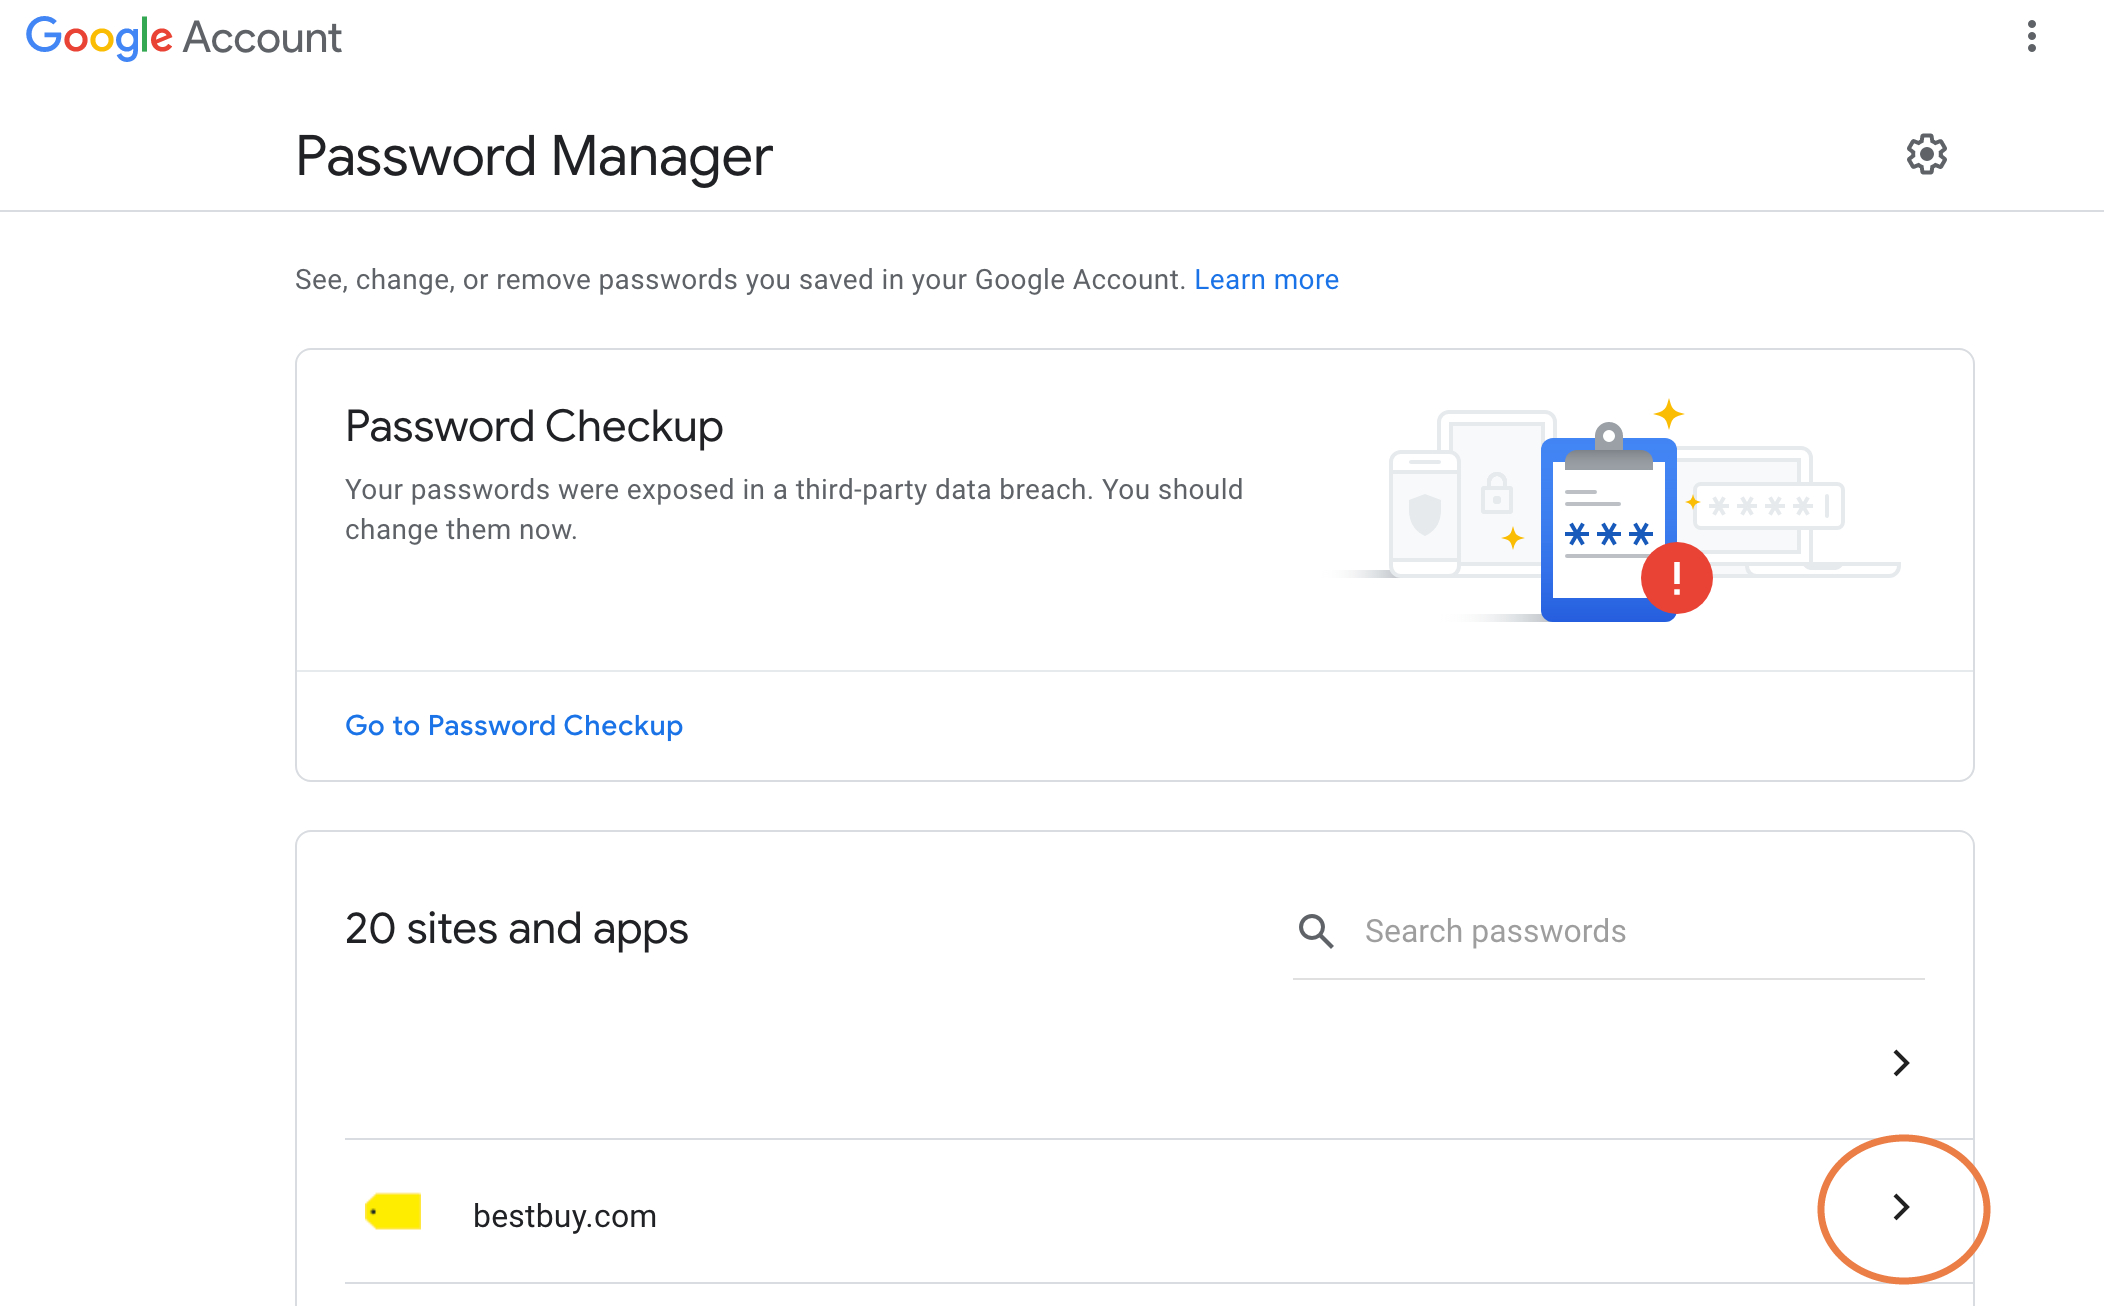 How to See Facebook Password in Google Chrome